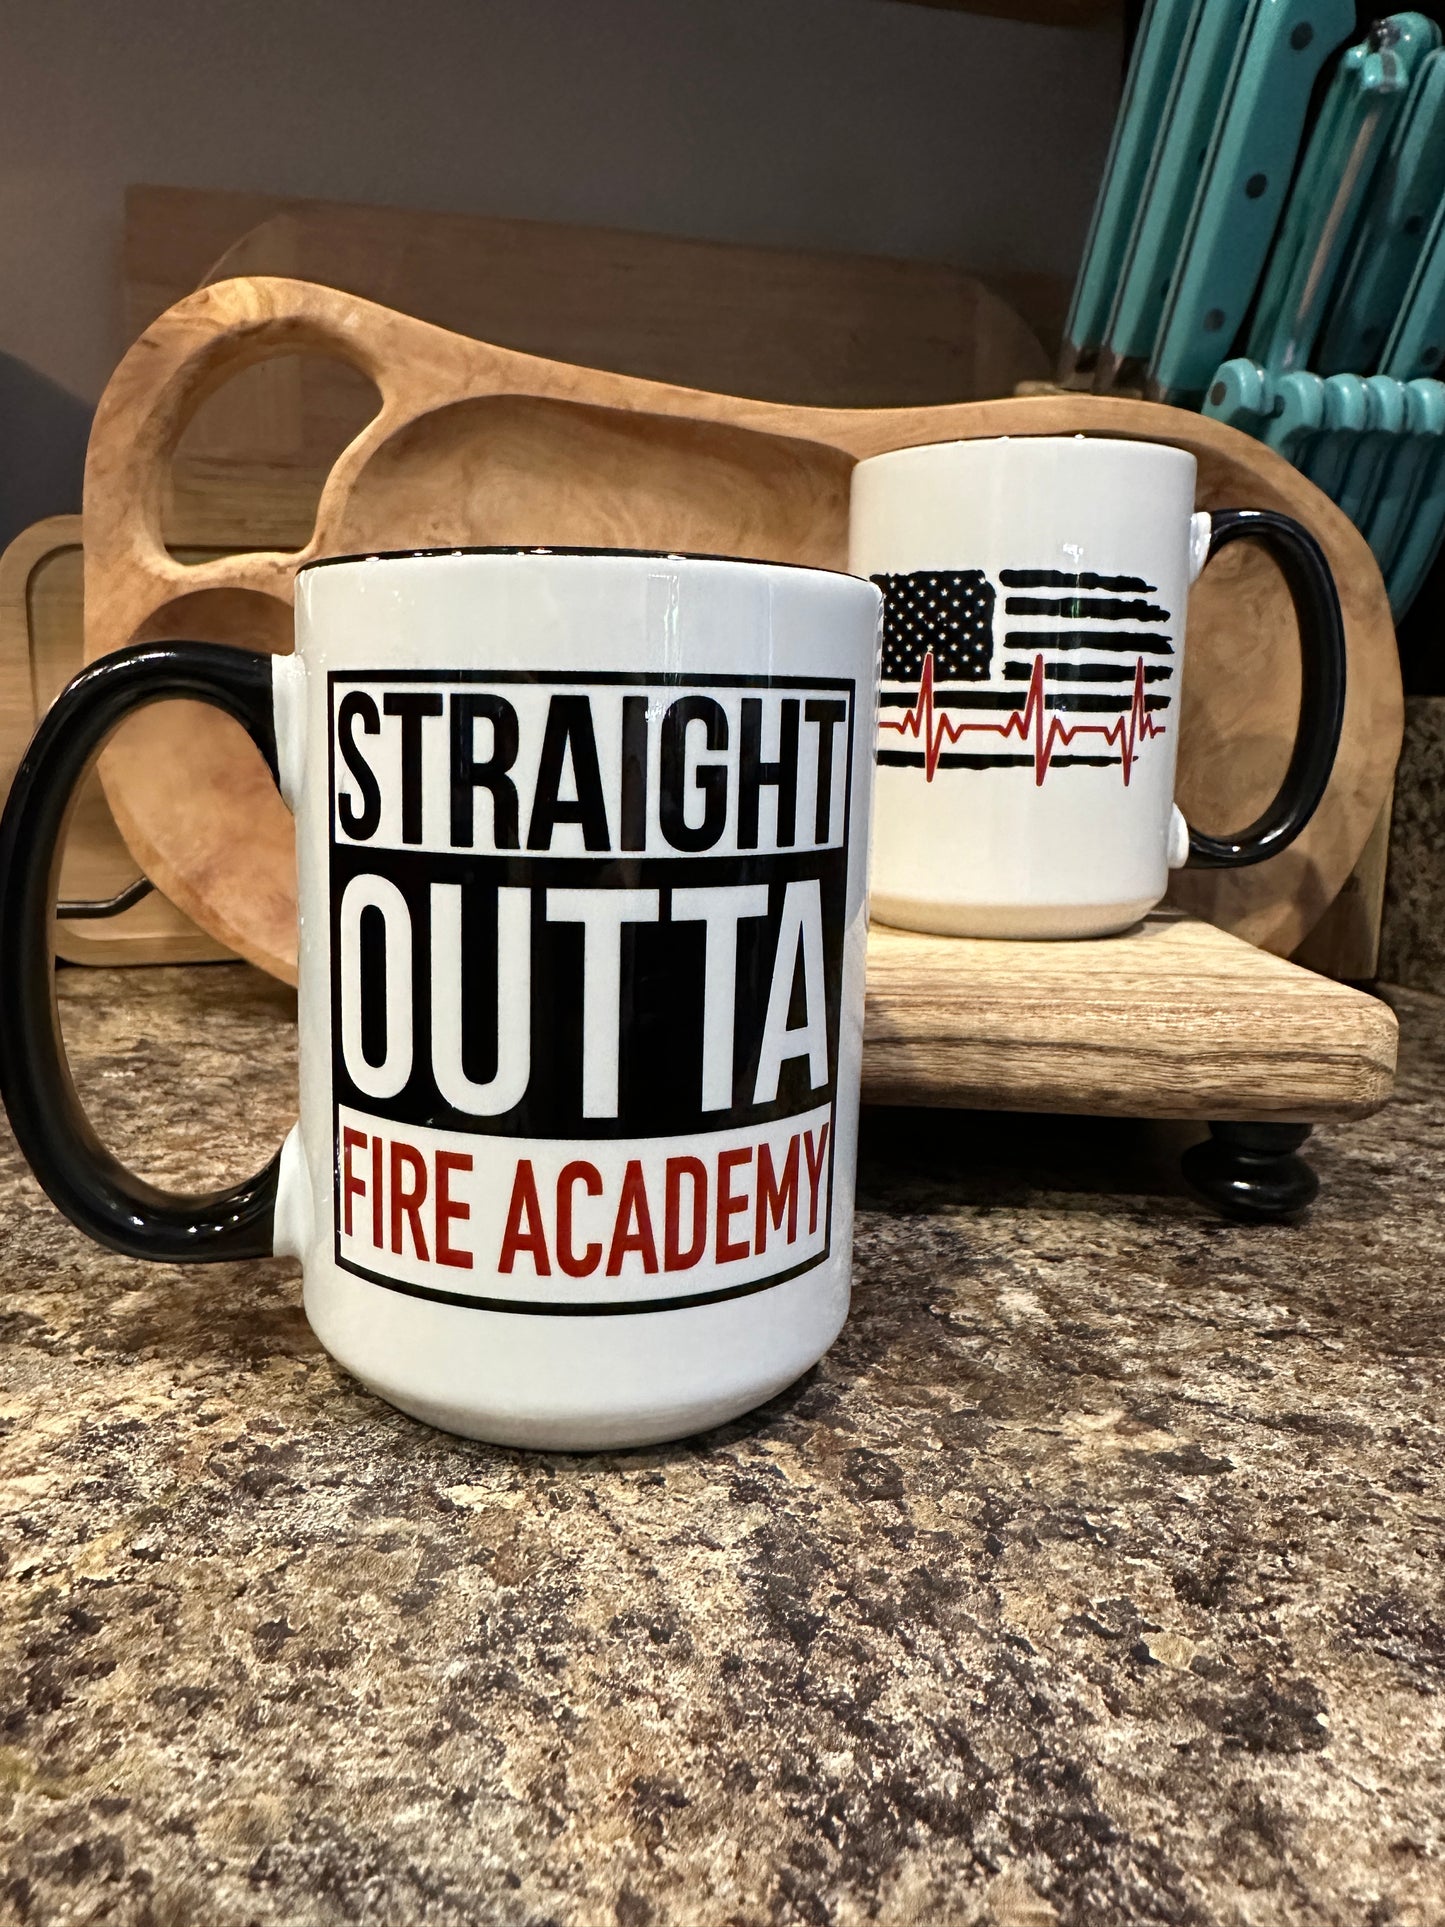 Black handle Mug, front graphic black and white cut out letters that read "straight outta fire academy". Back image is the tattered flag with the red line heart beat